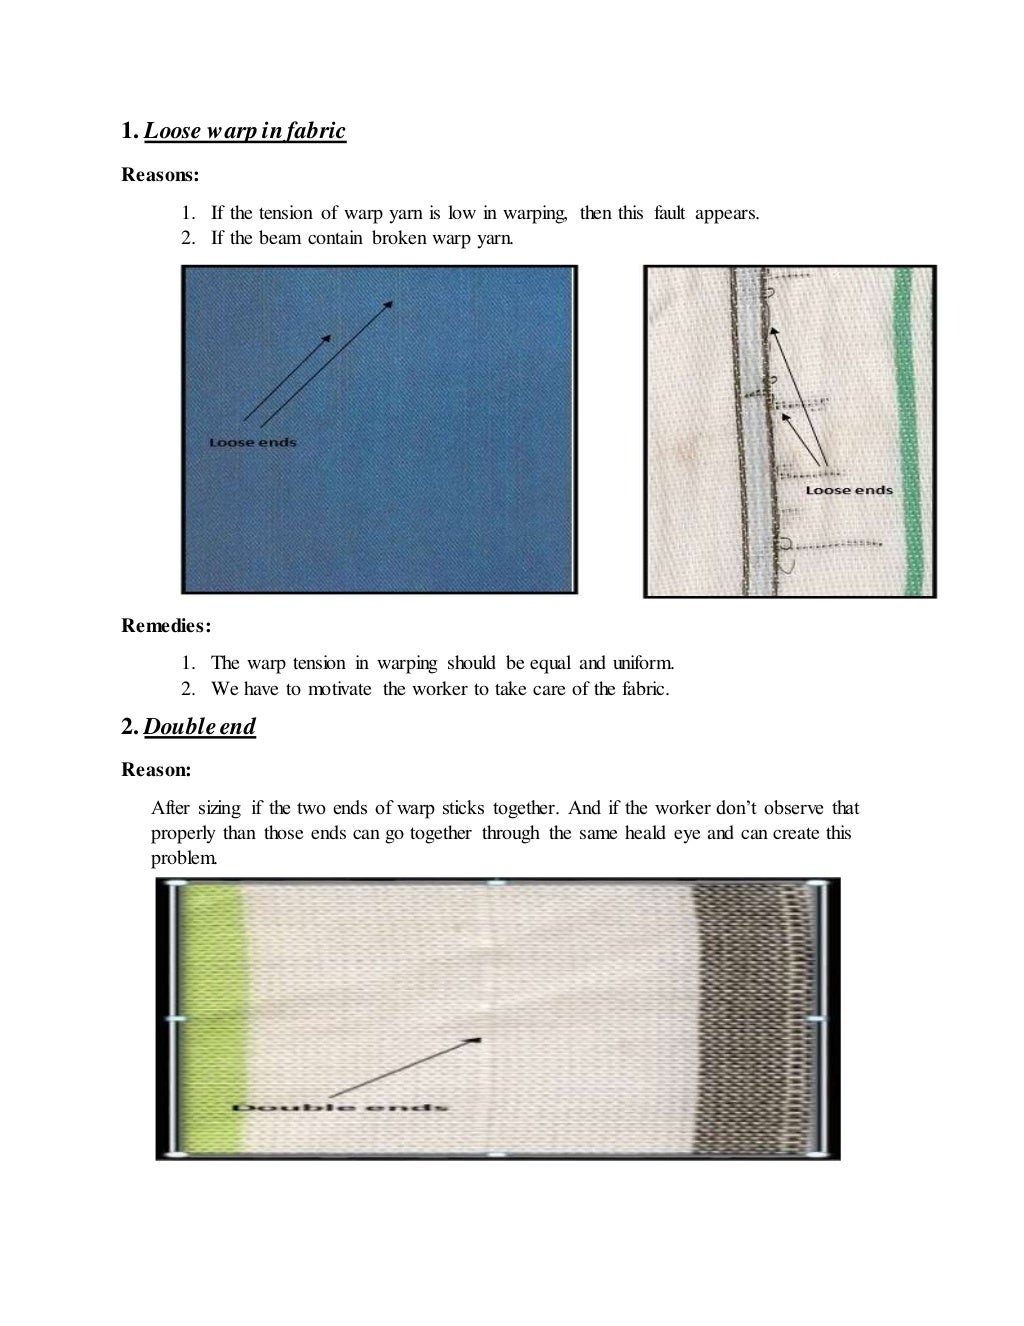 Different faults of fabric